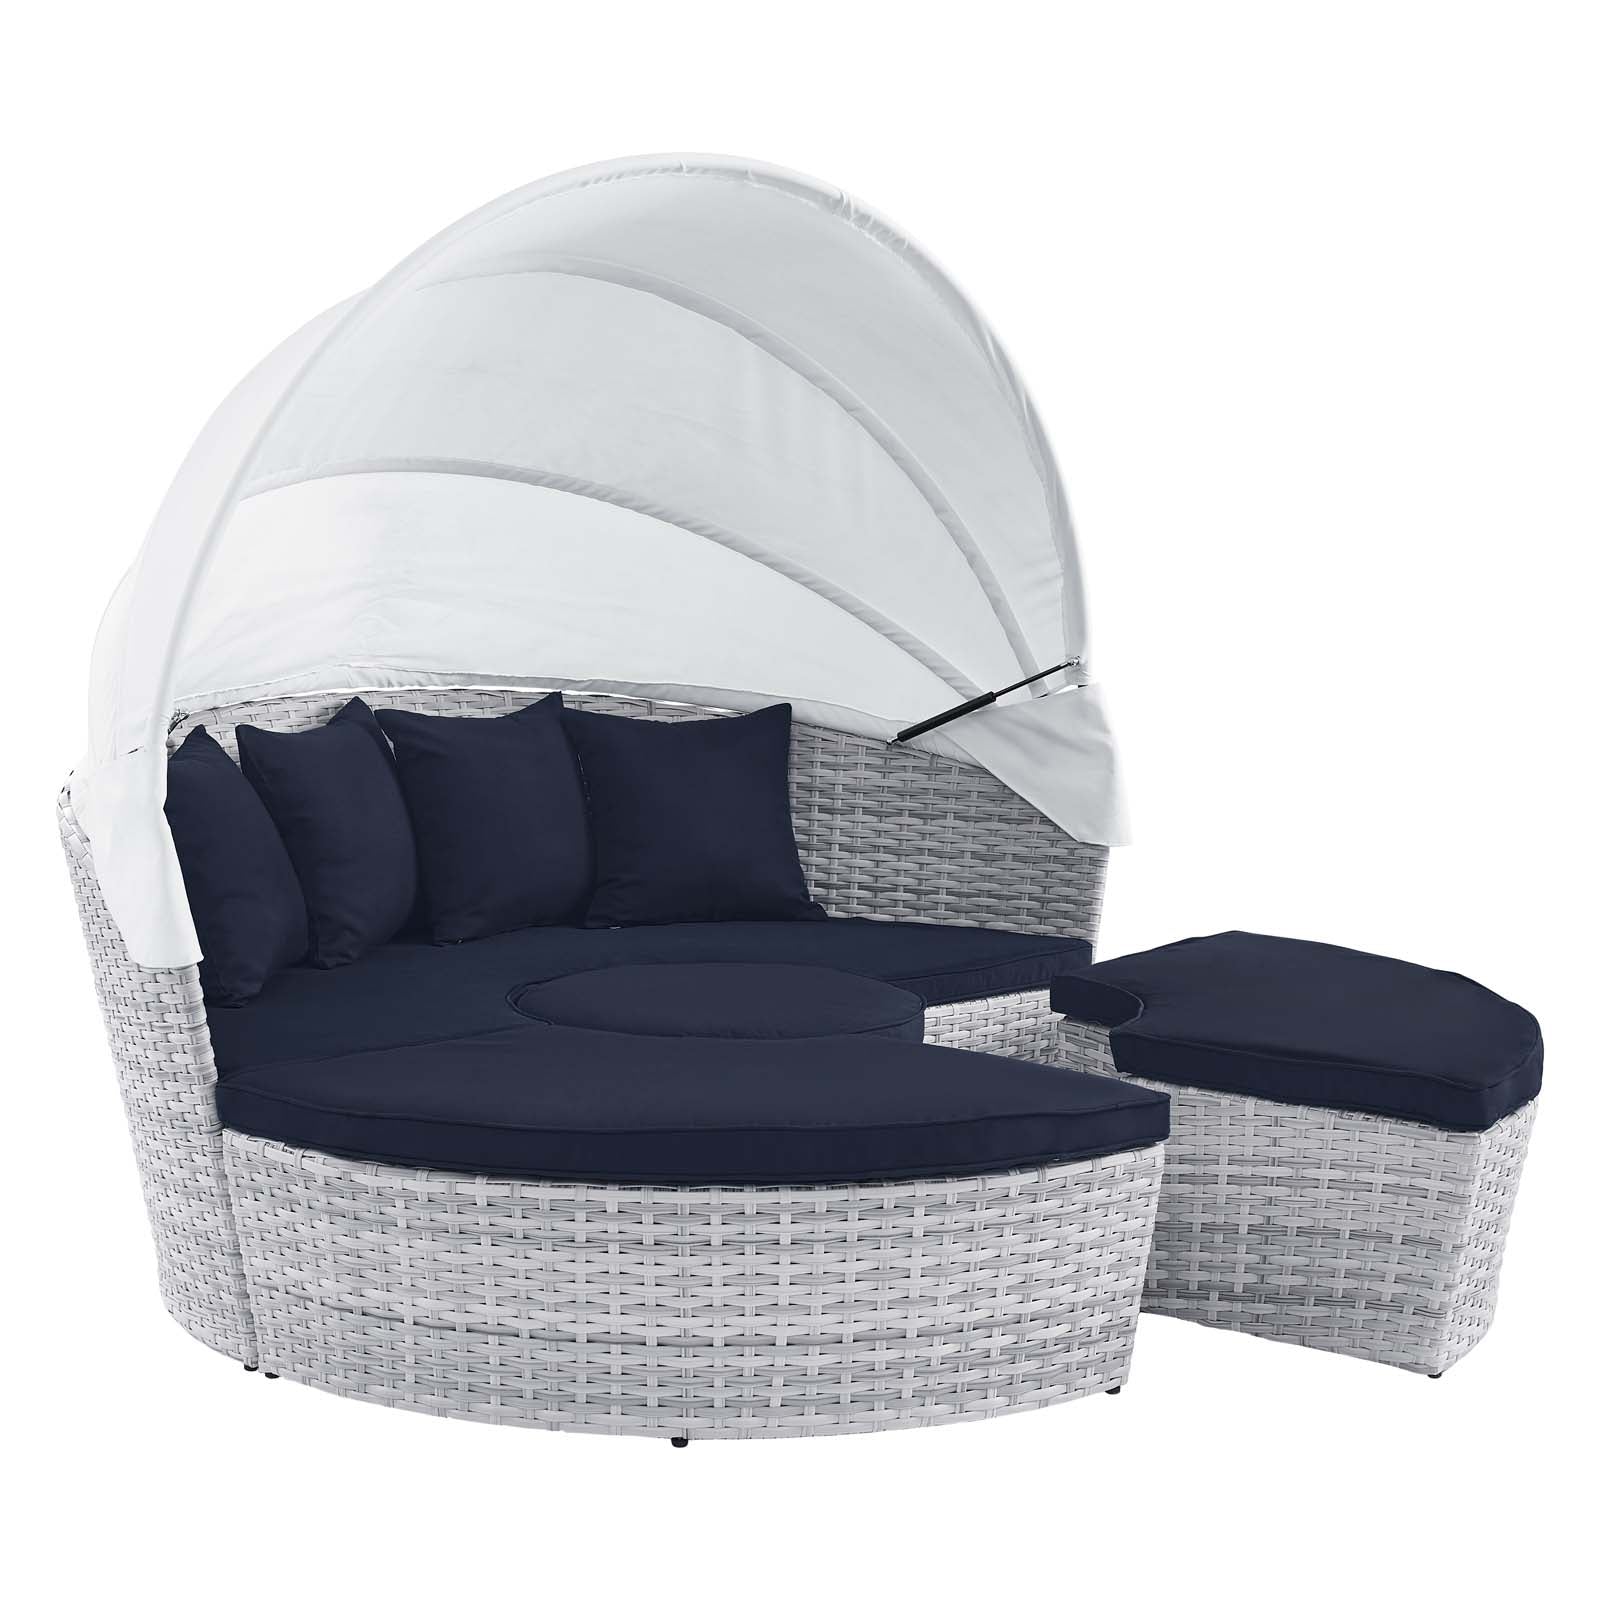 Modway Patio Daybeds - Scottsdale Canopy Outdoor Patio Daybed Light Gray Navy